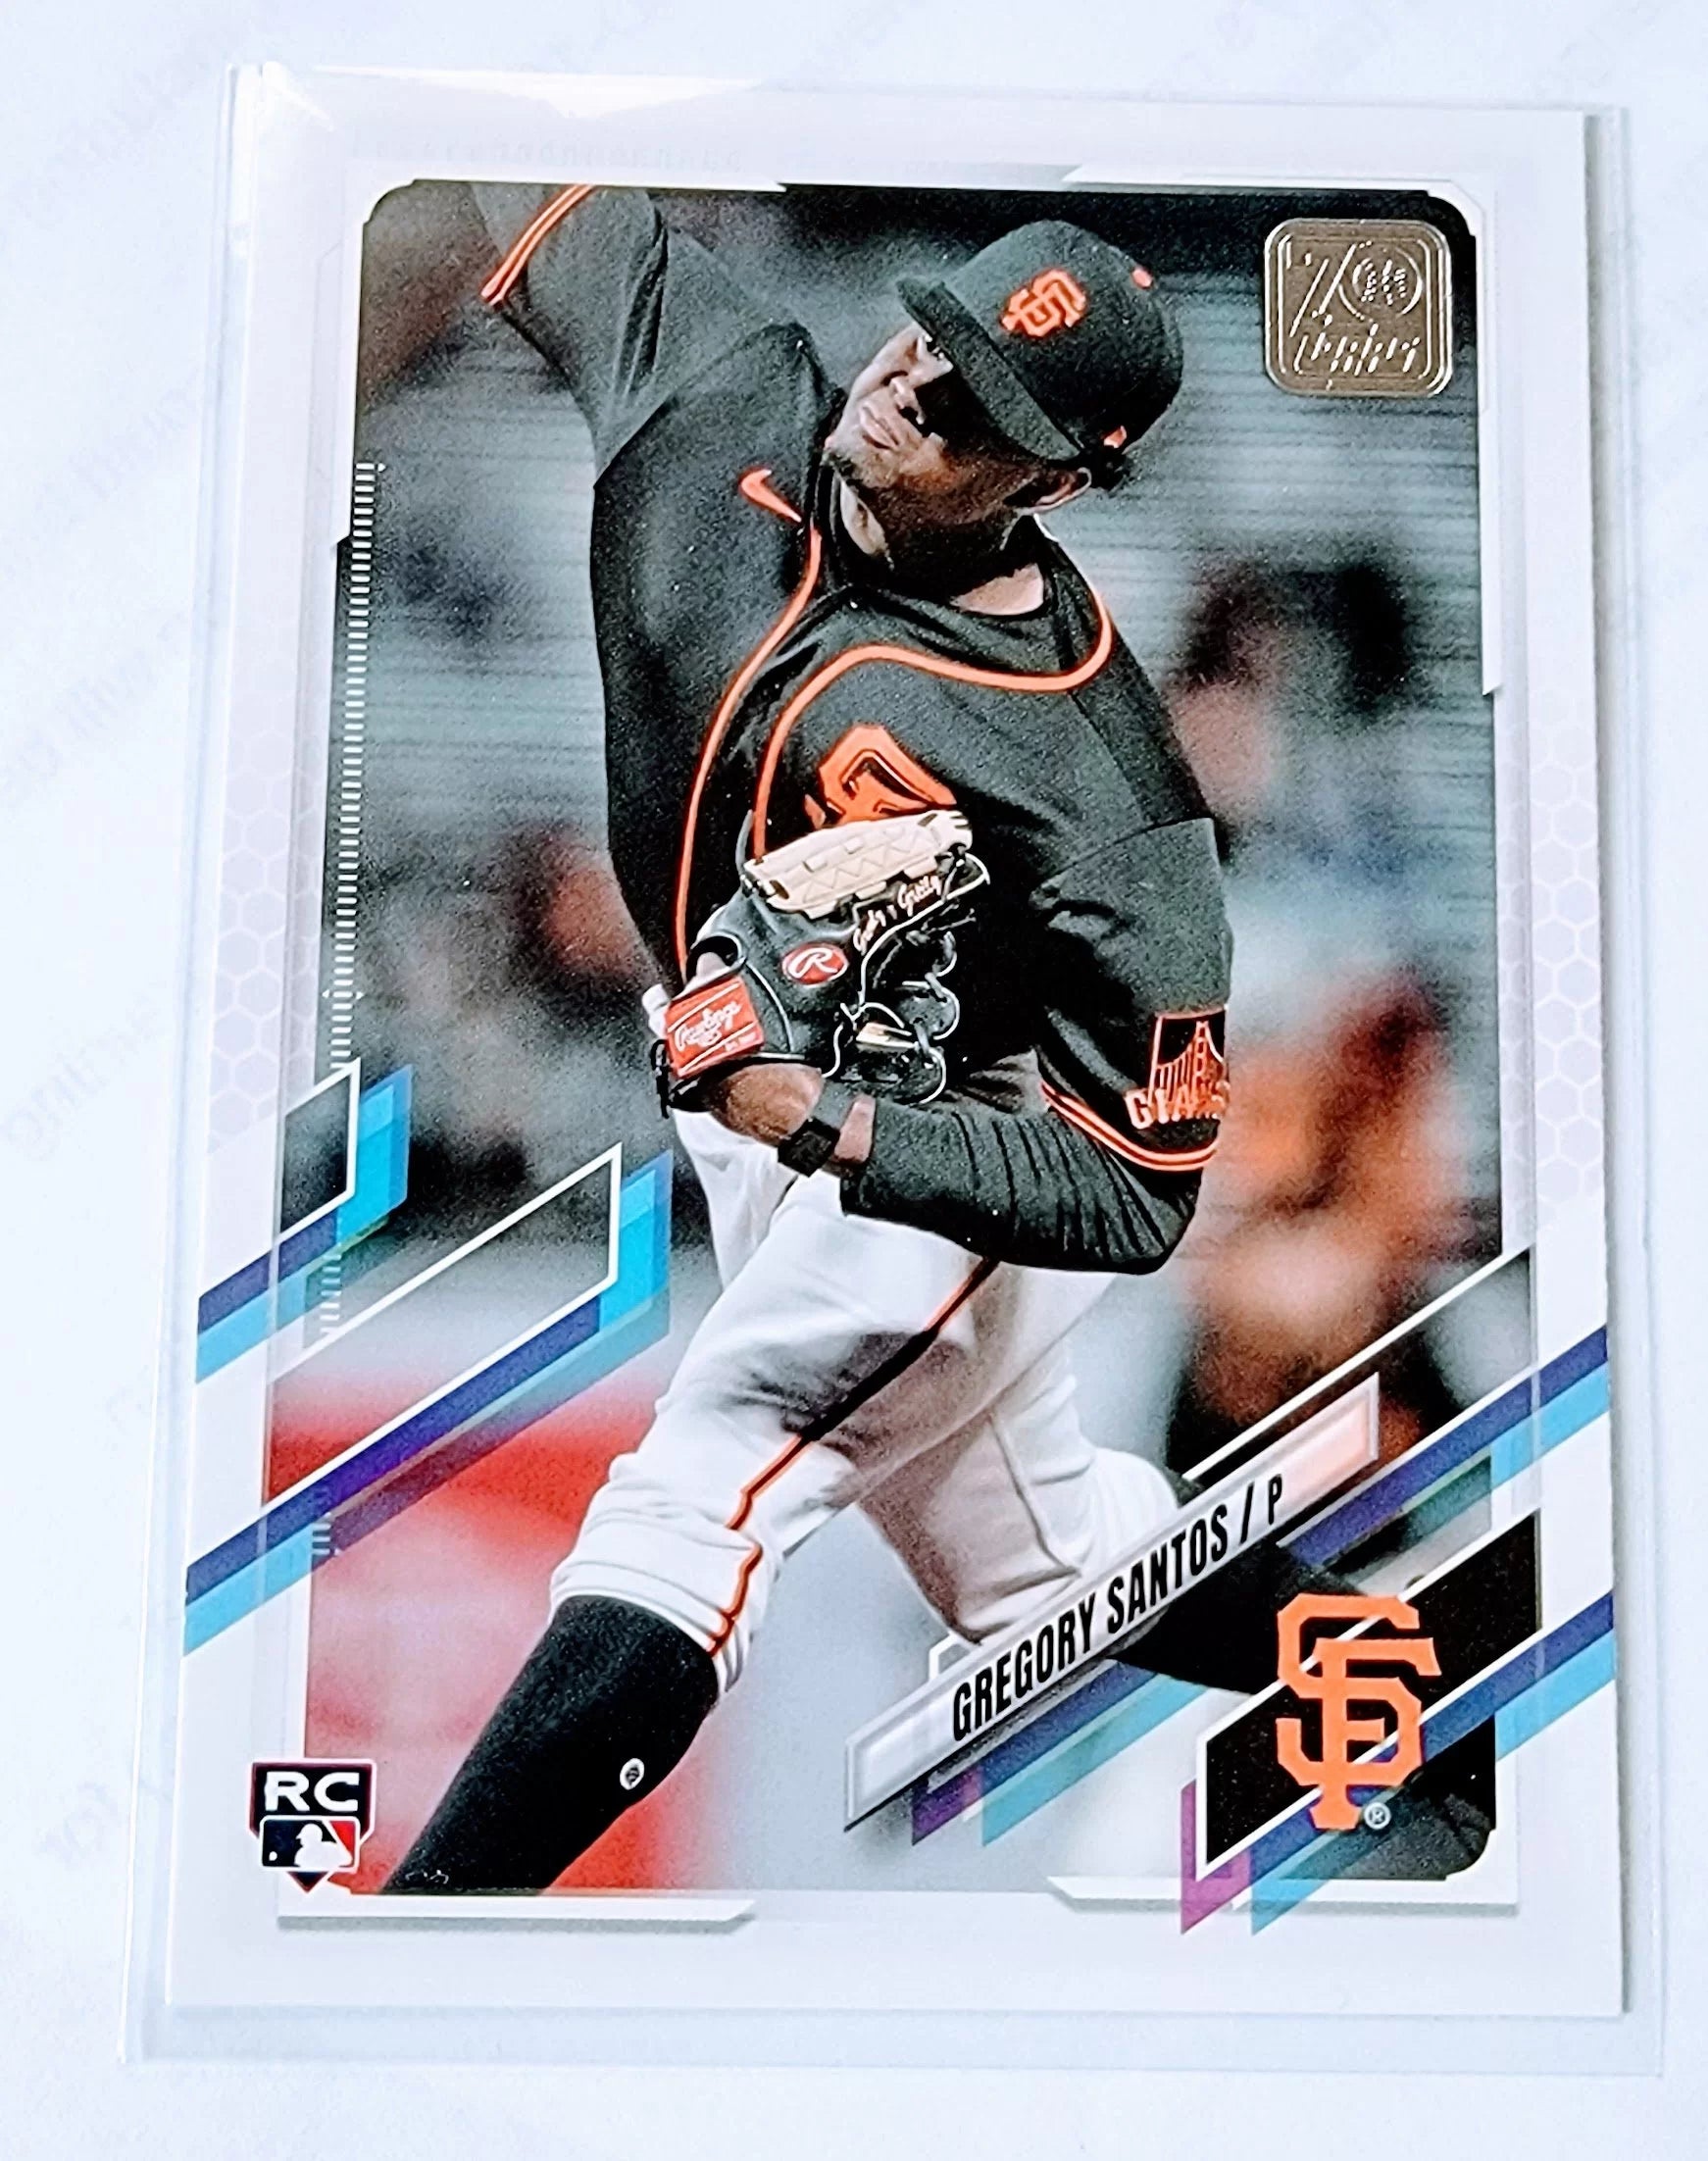 2021 Topps Update Gregory Santos Rookie Baseball Trading Card SMCB1 simple Xclusive Collectibles   